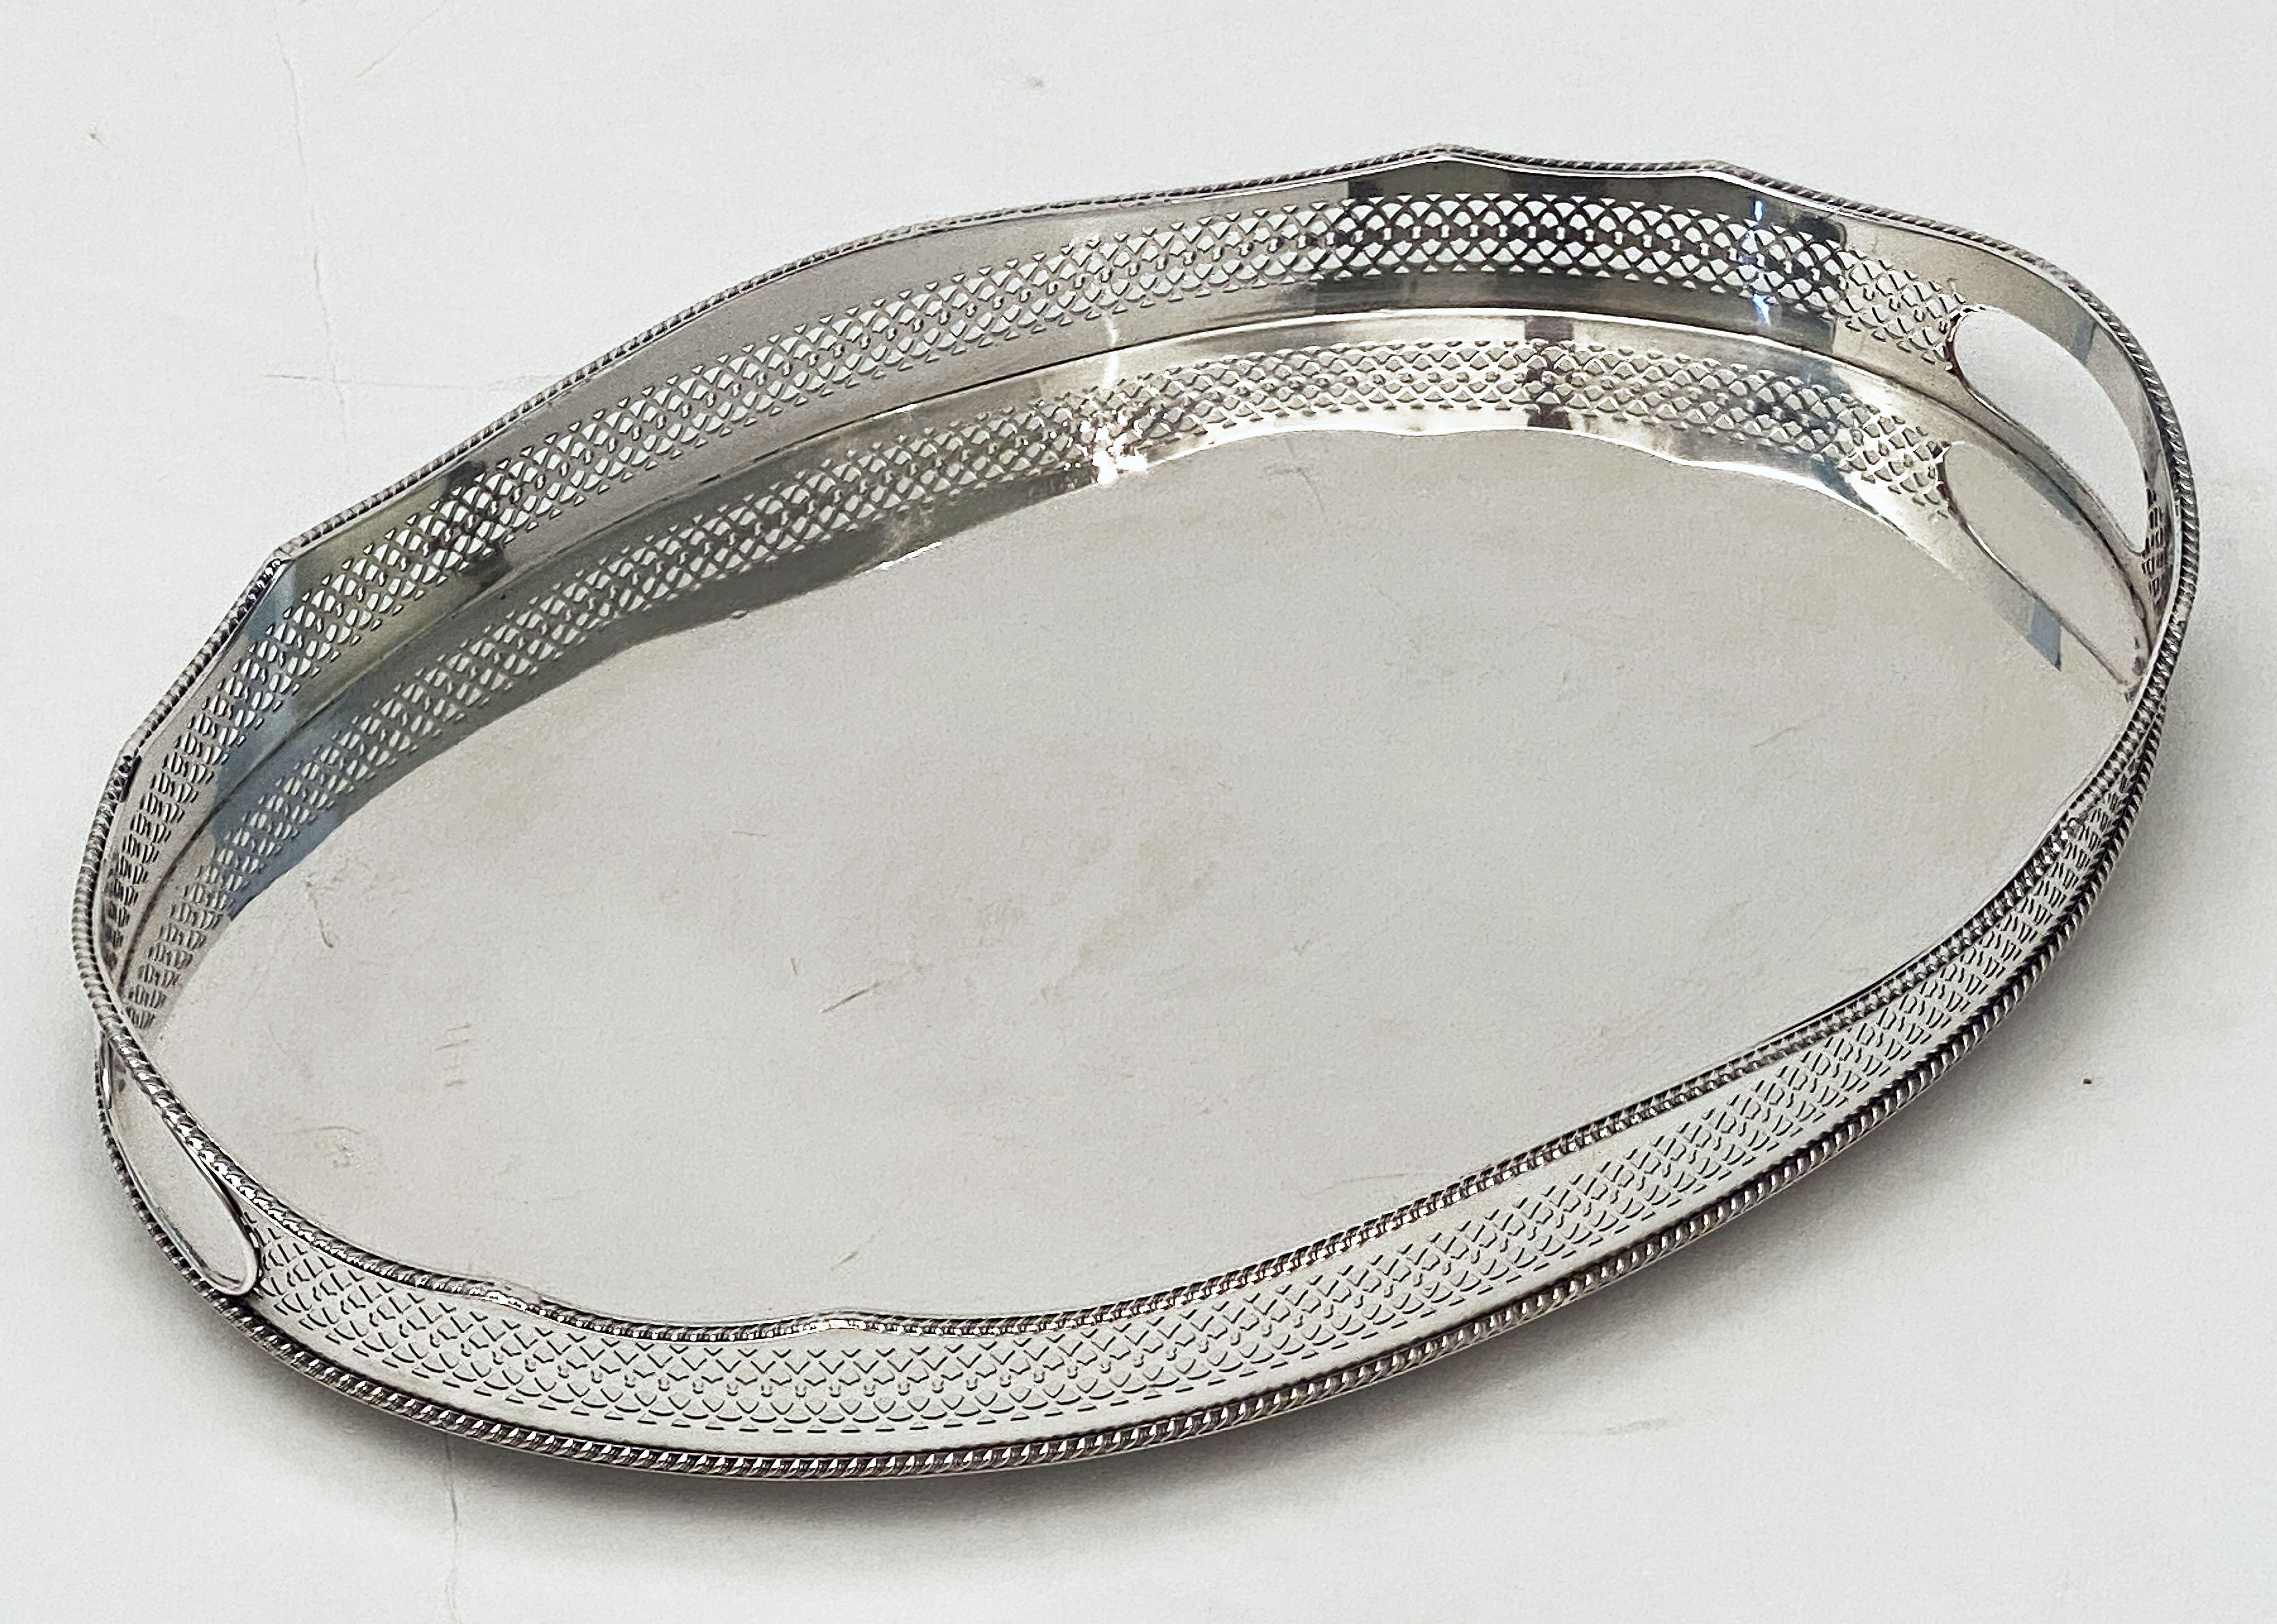 Pair of English Silver Oval Gallery Serving or Drinks Trays 'Priced as a Pair' 6